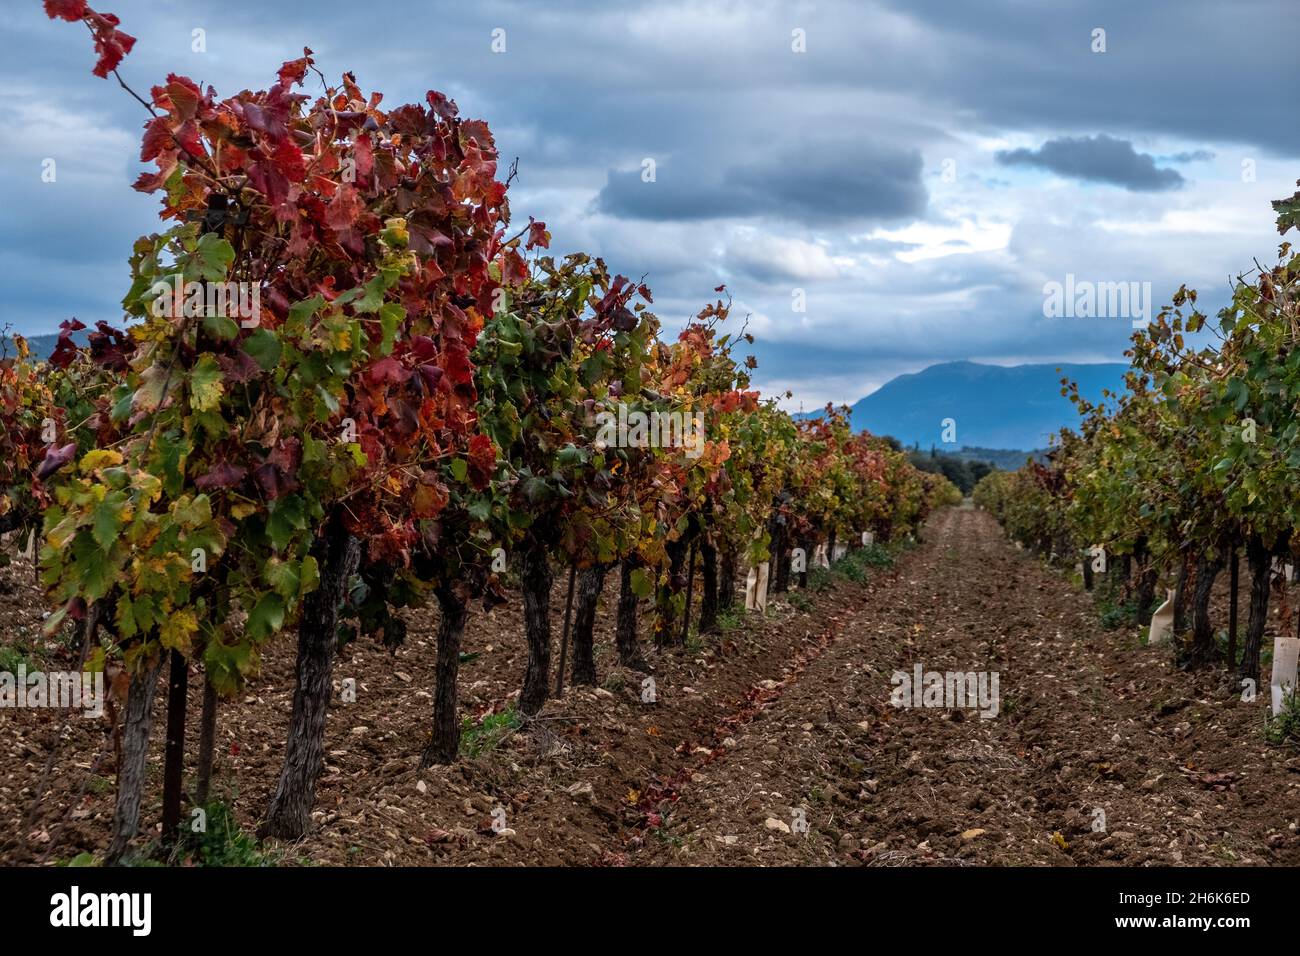 Red leaved Rhone grape vines in Autumn outside the village of Mirabel-aux-Baronnies - Mont Ventoux in the background. Provence, France Stock Photo